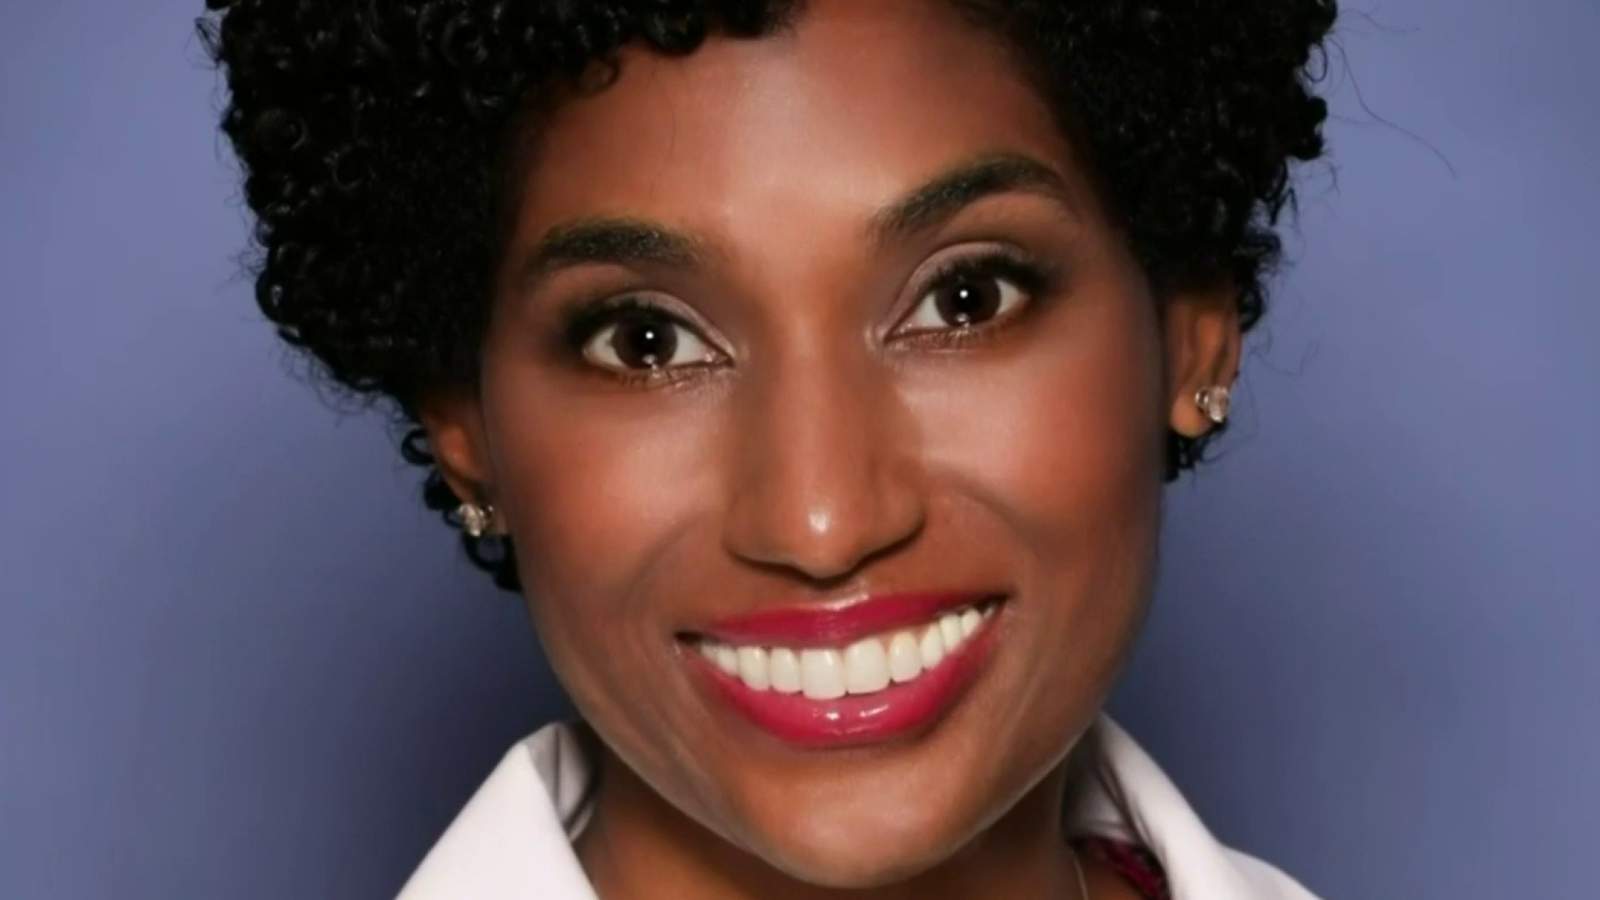 Local doctor becomes first Black woman to lead neurosurgery department at Detroit Medical Center